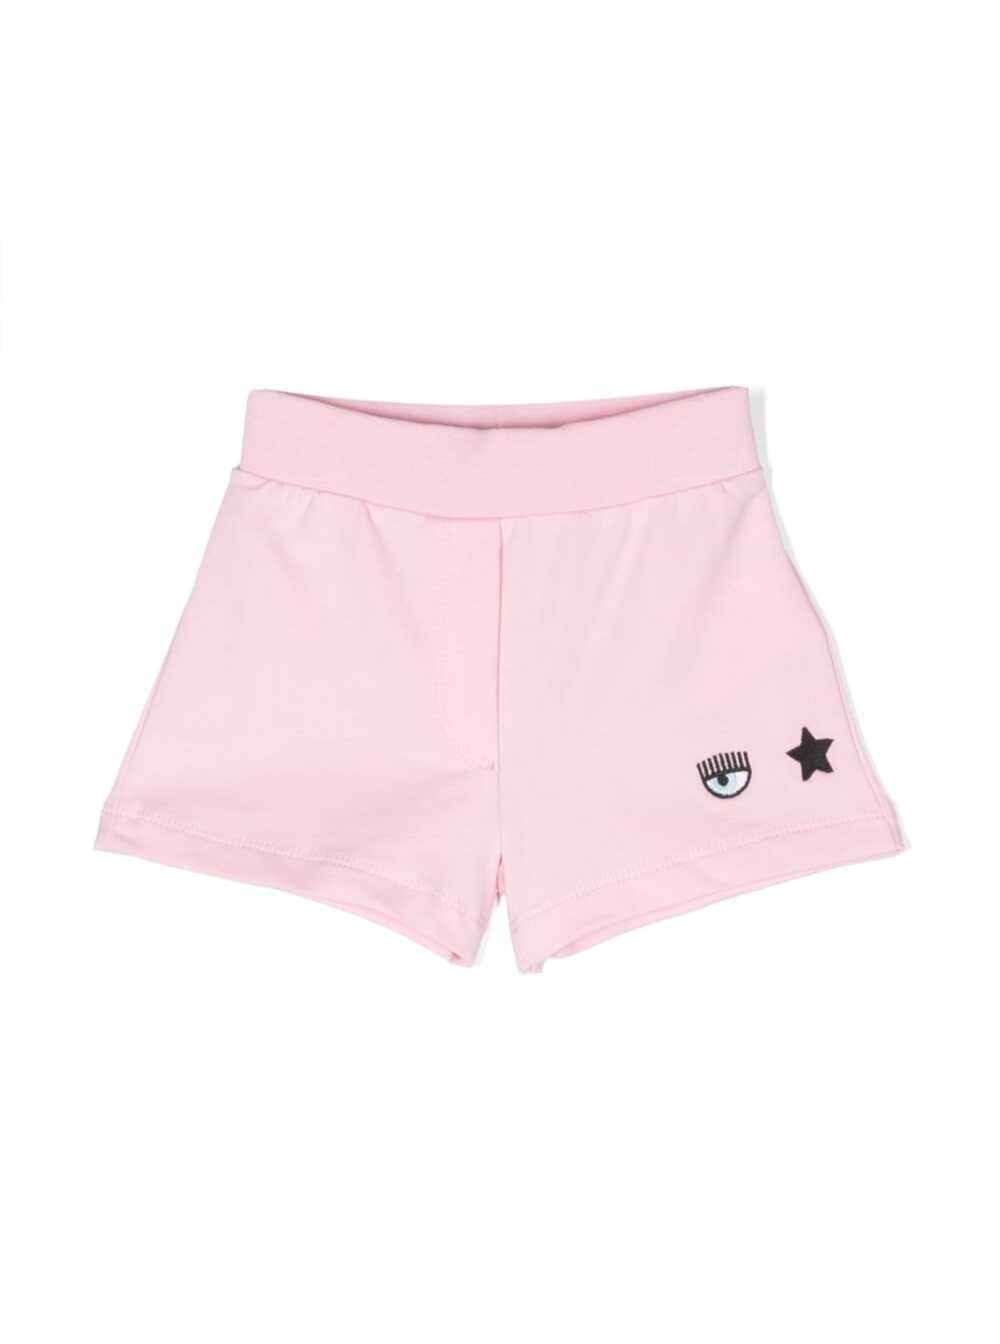 CHIARA FERRAGNI CASUAL SHORTS WITH SIGNATURE EYELIKE LOGO IN PINK COTTON GIRL